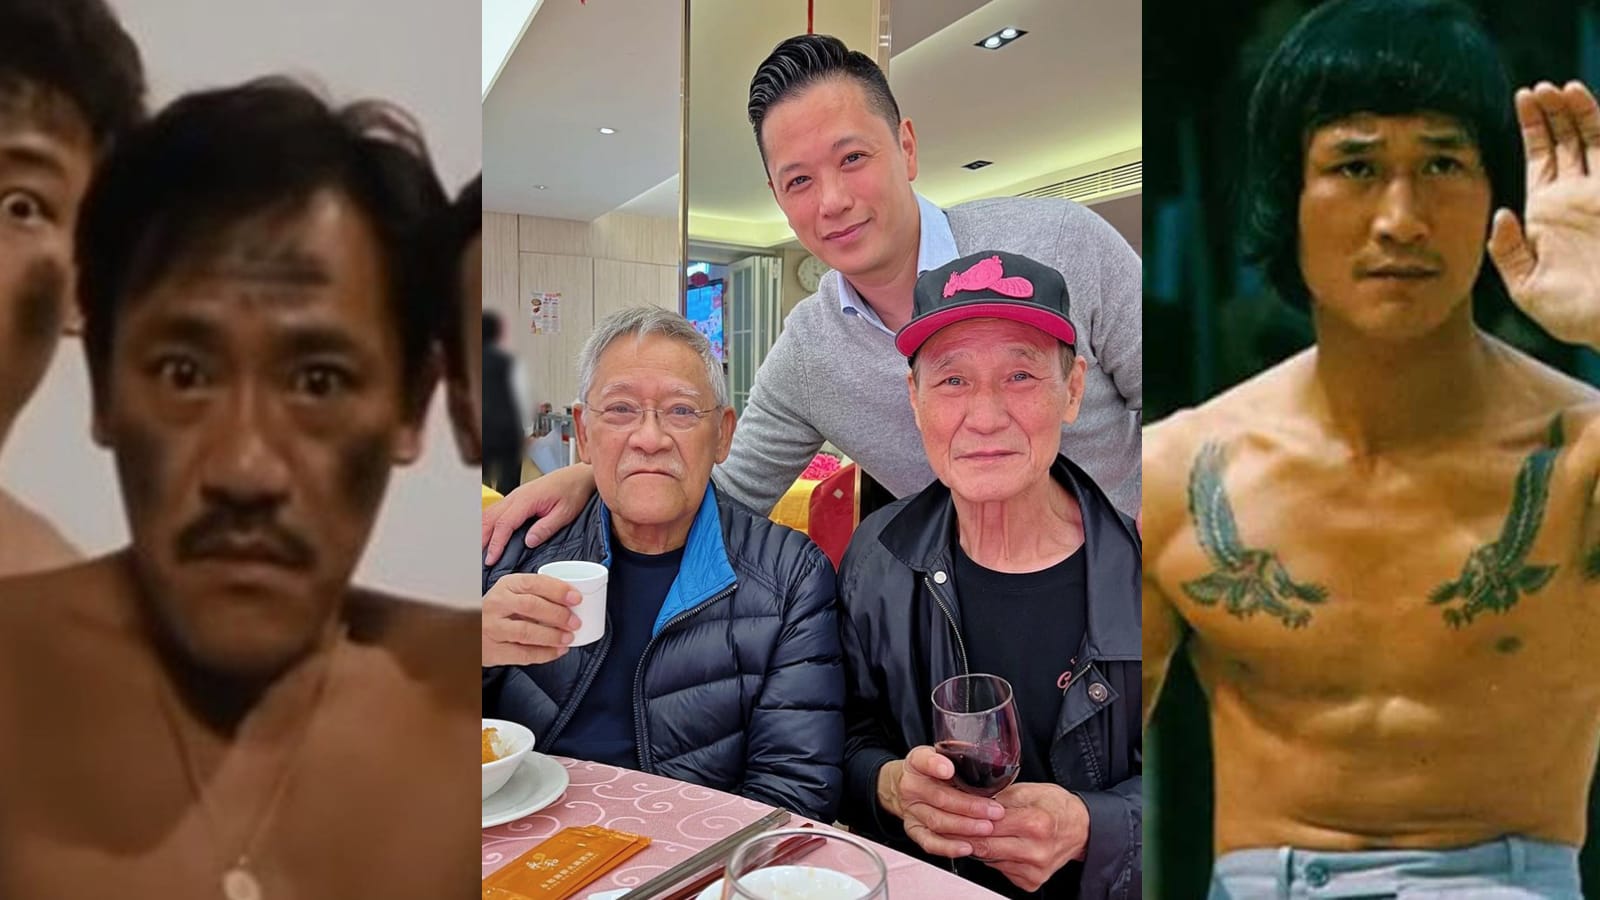 HK Screen Icons Richard Ng & Michael Chan, Both Plagued By Health Problems, Make Rare Appearance On IG 